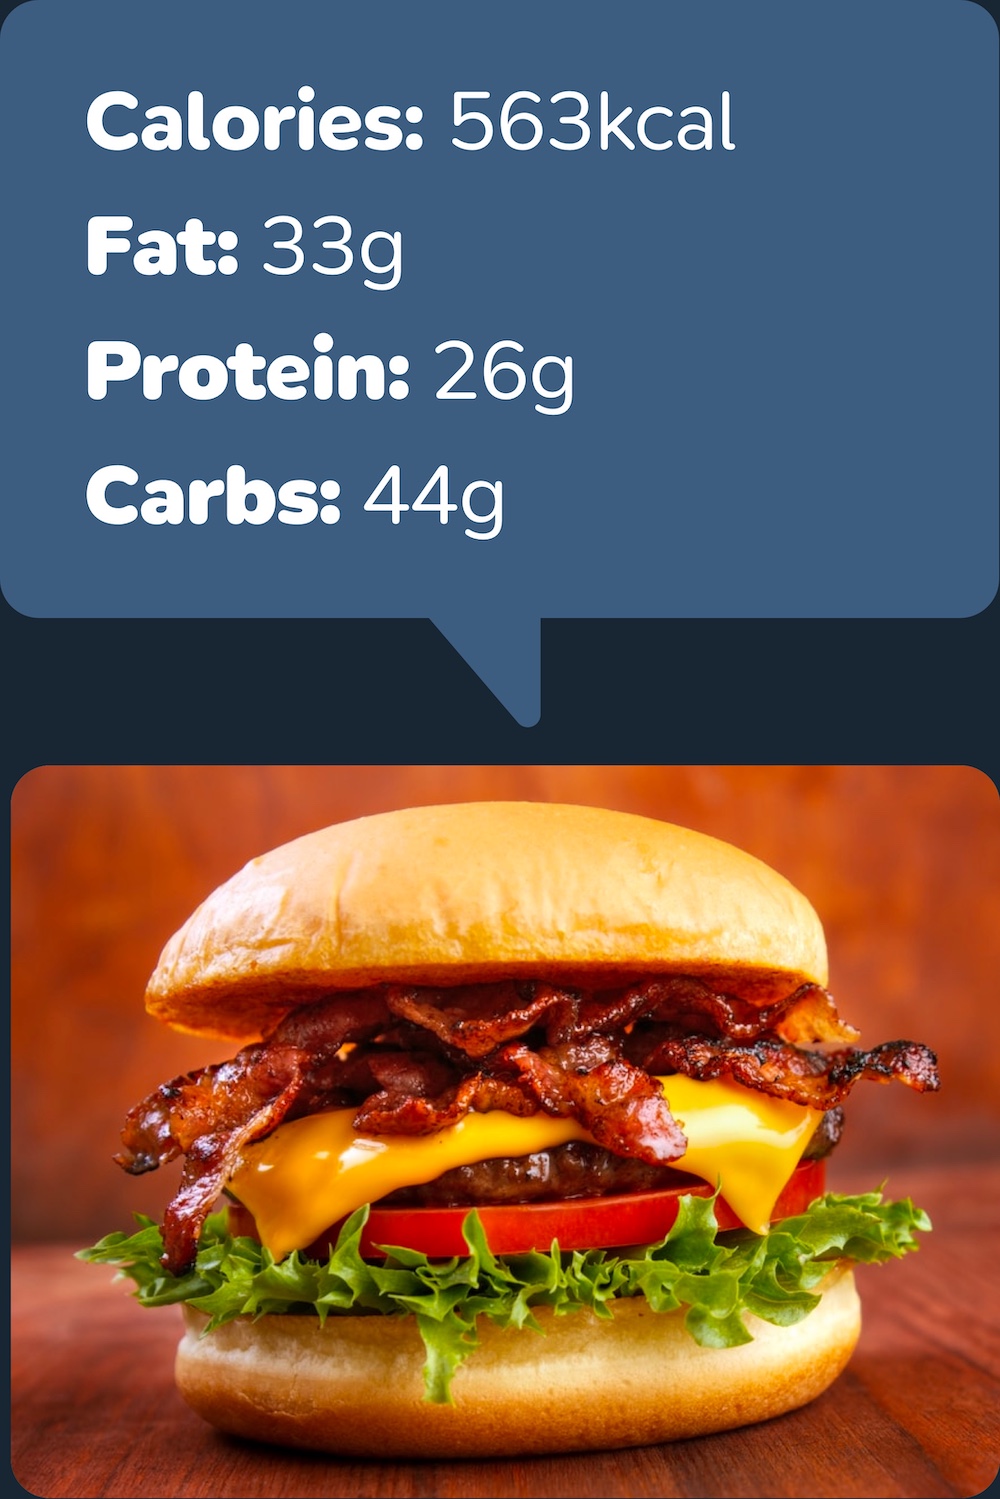 Sending a picture of a burger to the chat bot and getting back calories, macros and ingredients.